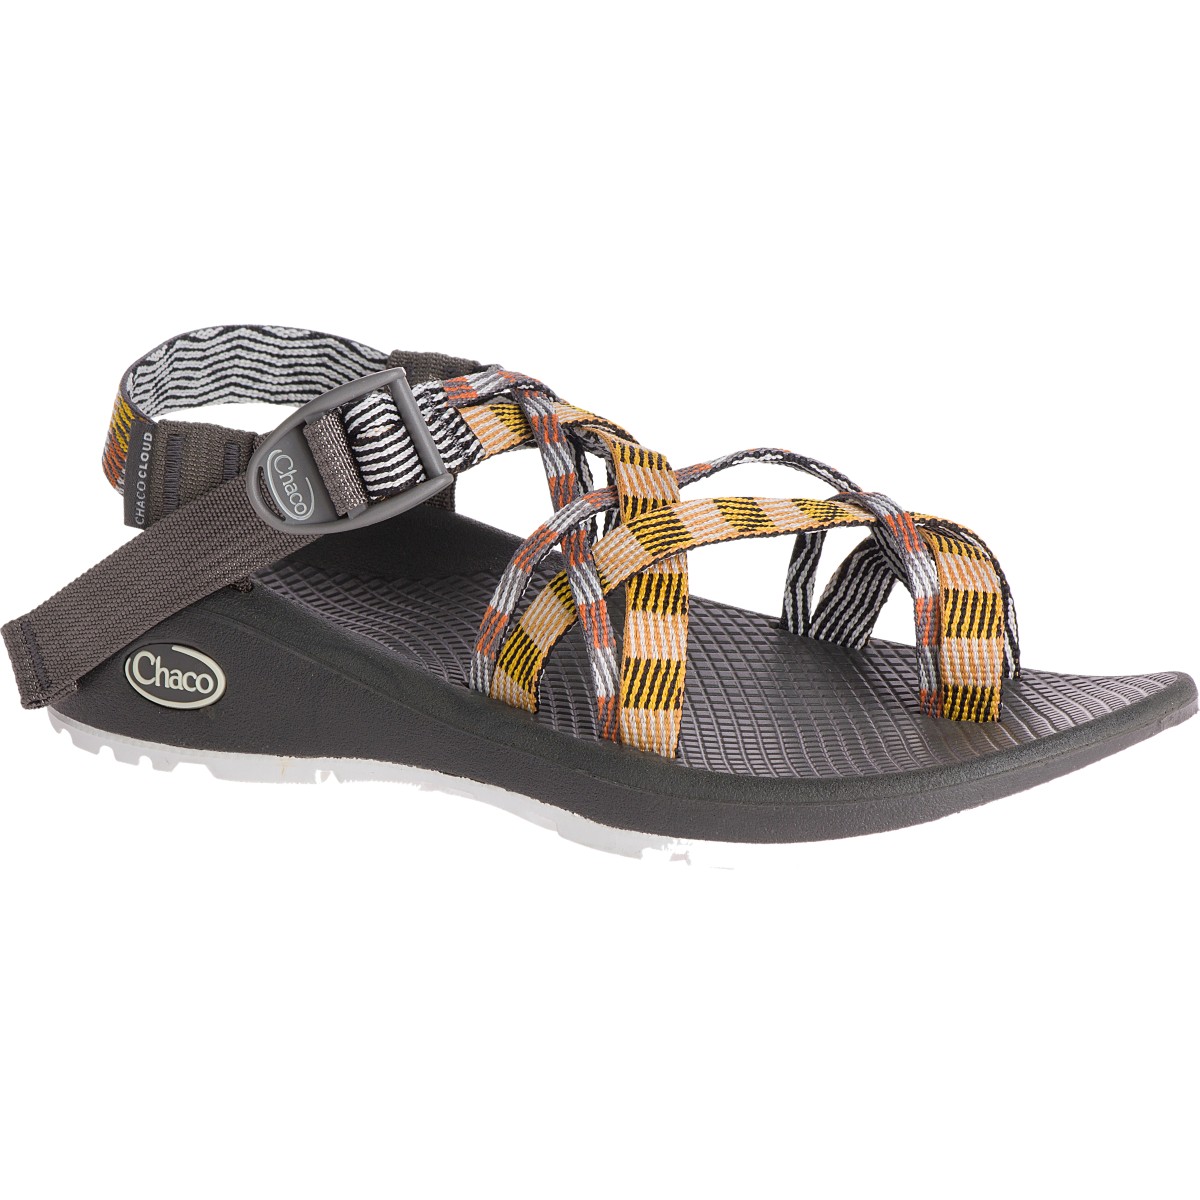 creed pine chacos